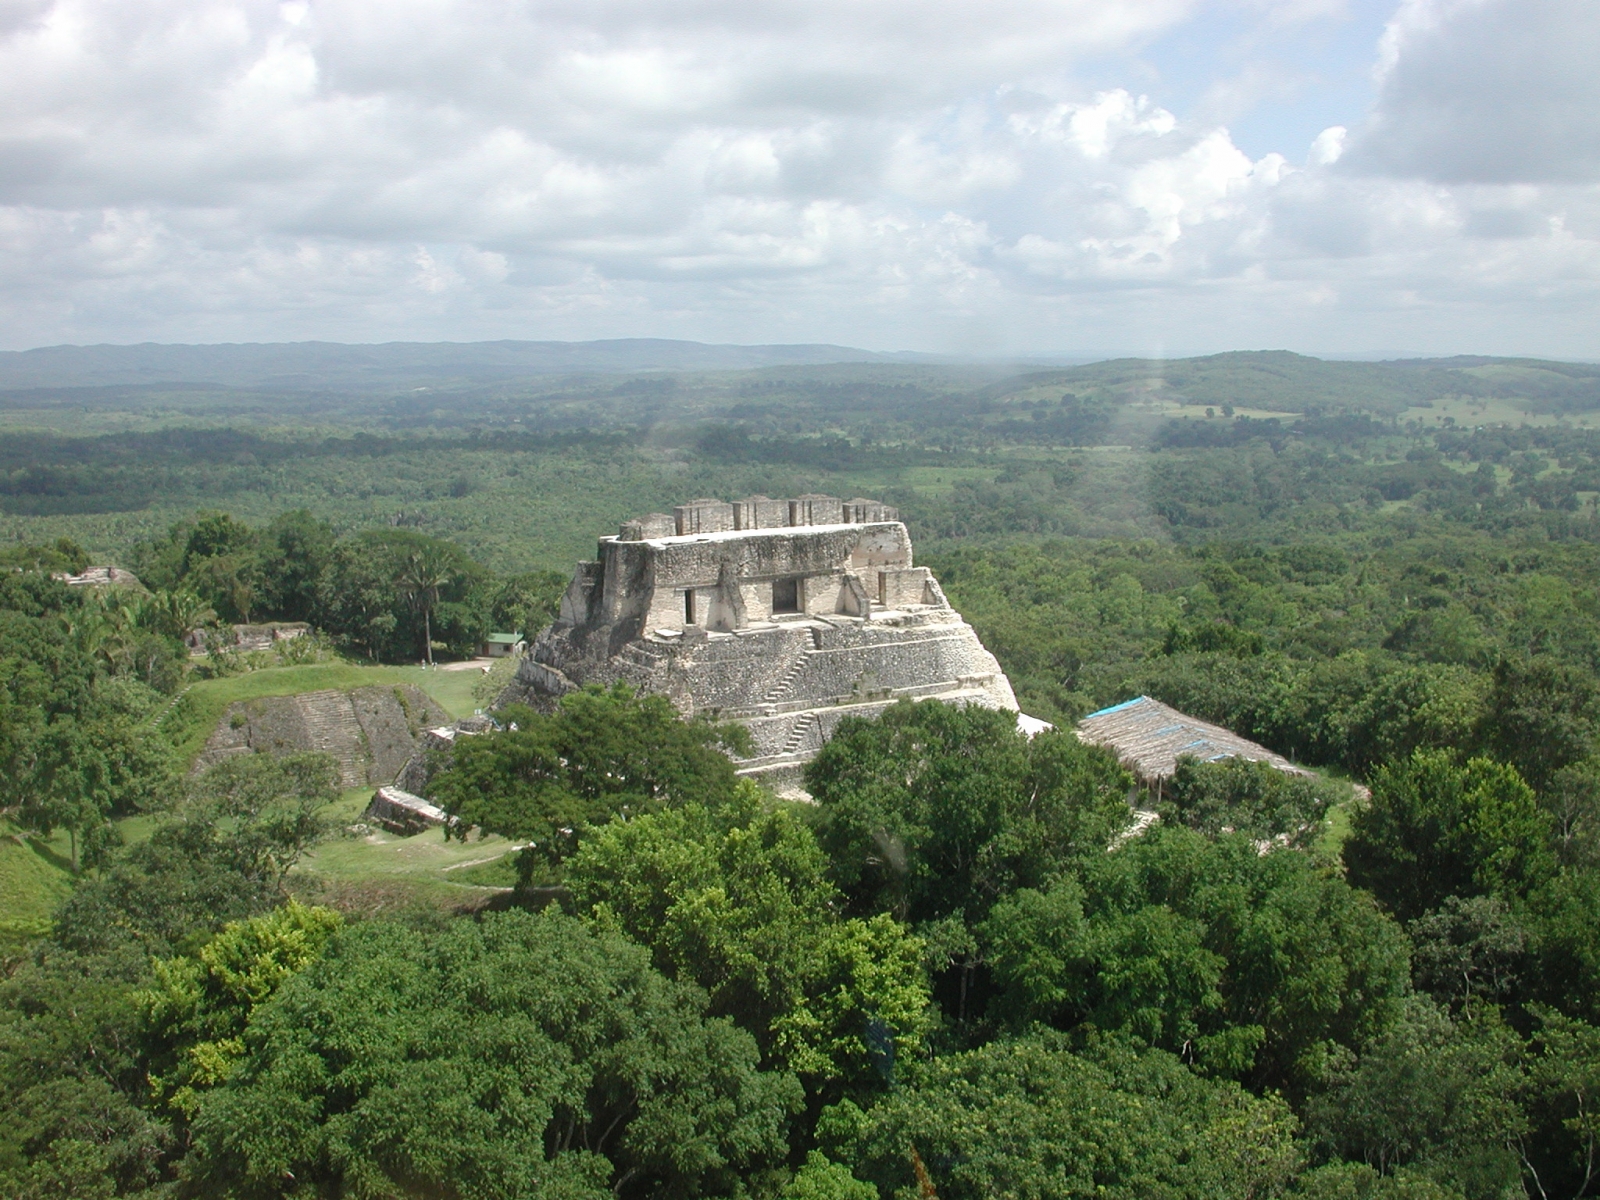 Largest Mayan tomb and hieroglyph panels found in Belize tell story of iconic civilisation